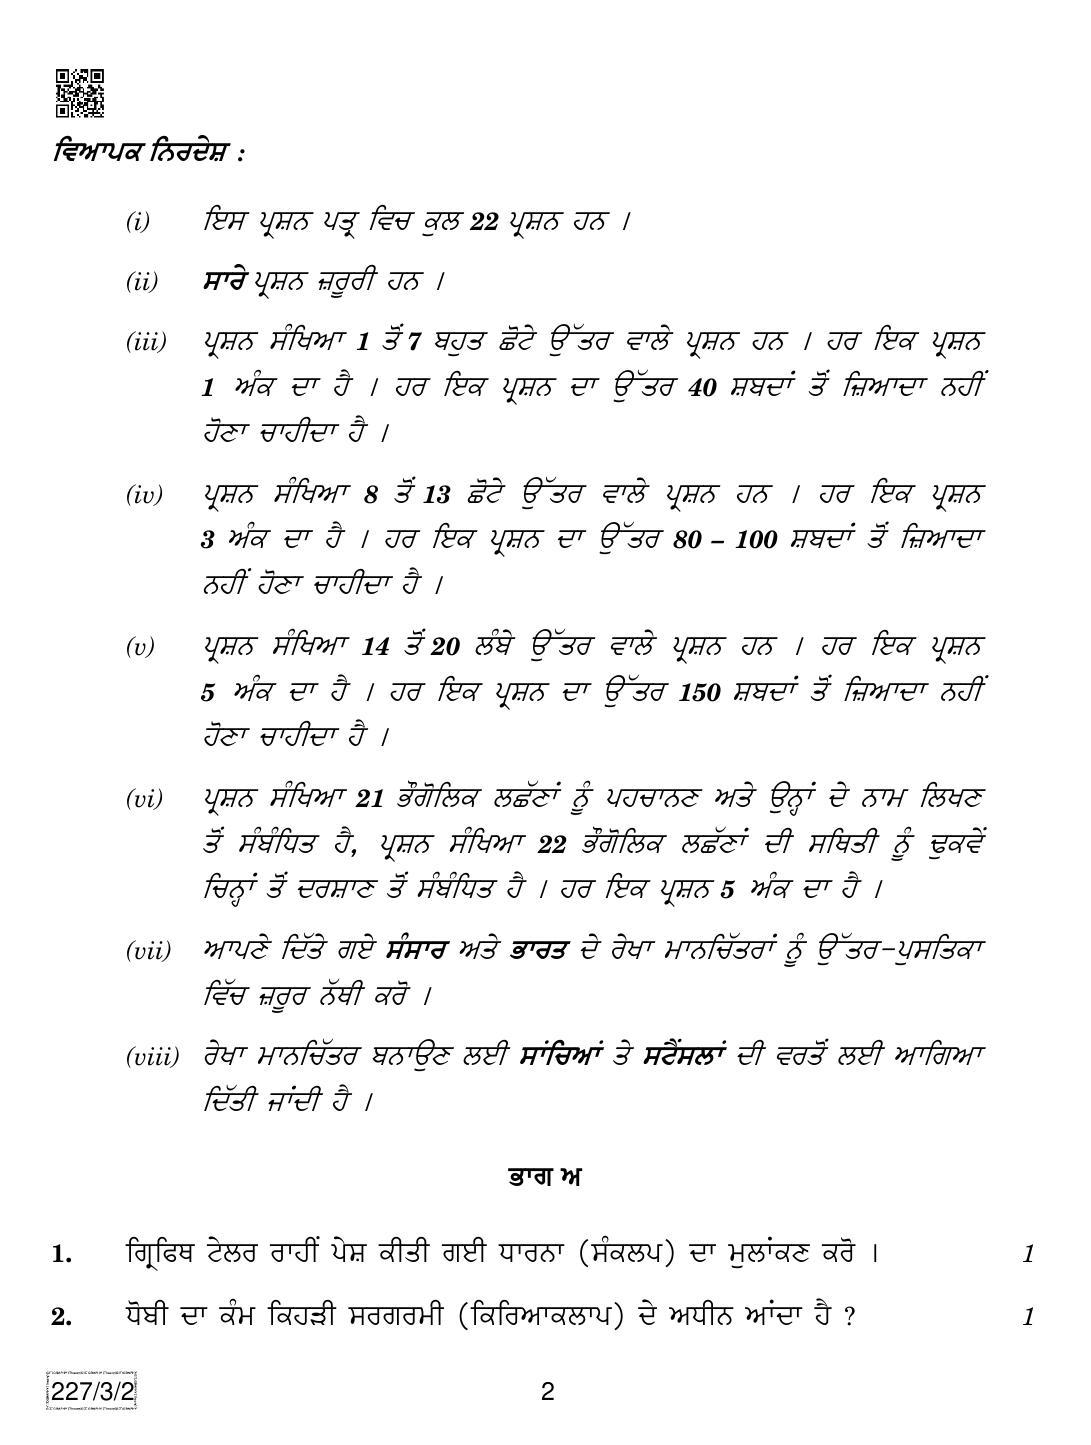 CBSE Class 12 227-3-2 Geography (Punjabi) 2019 Question Paper - Page 2